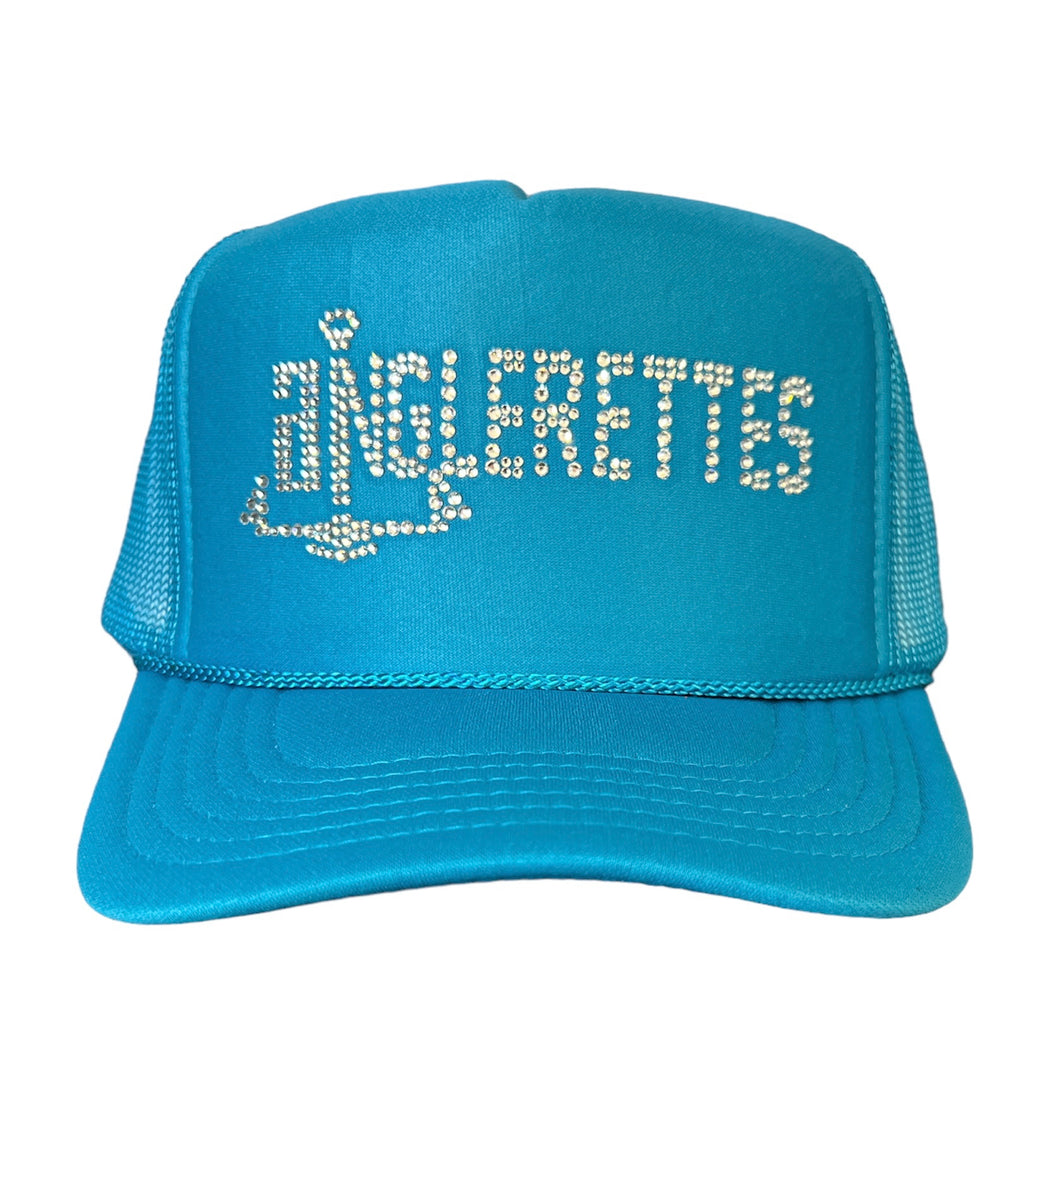 Adults Anglerettes Bling Hats Turquoise